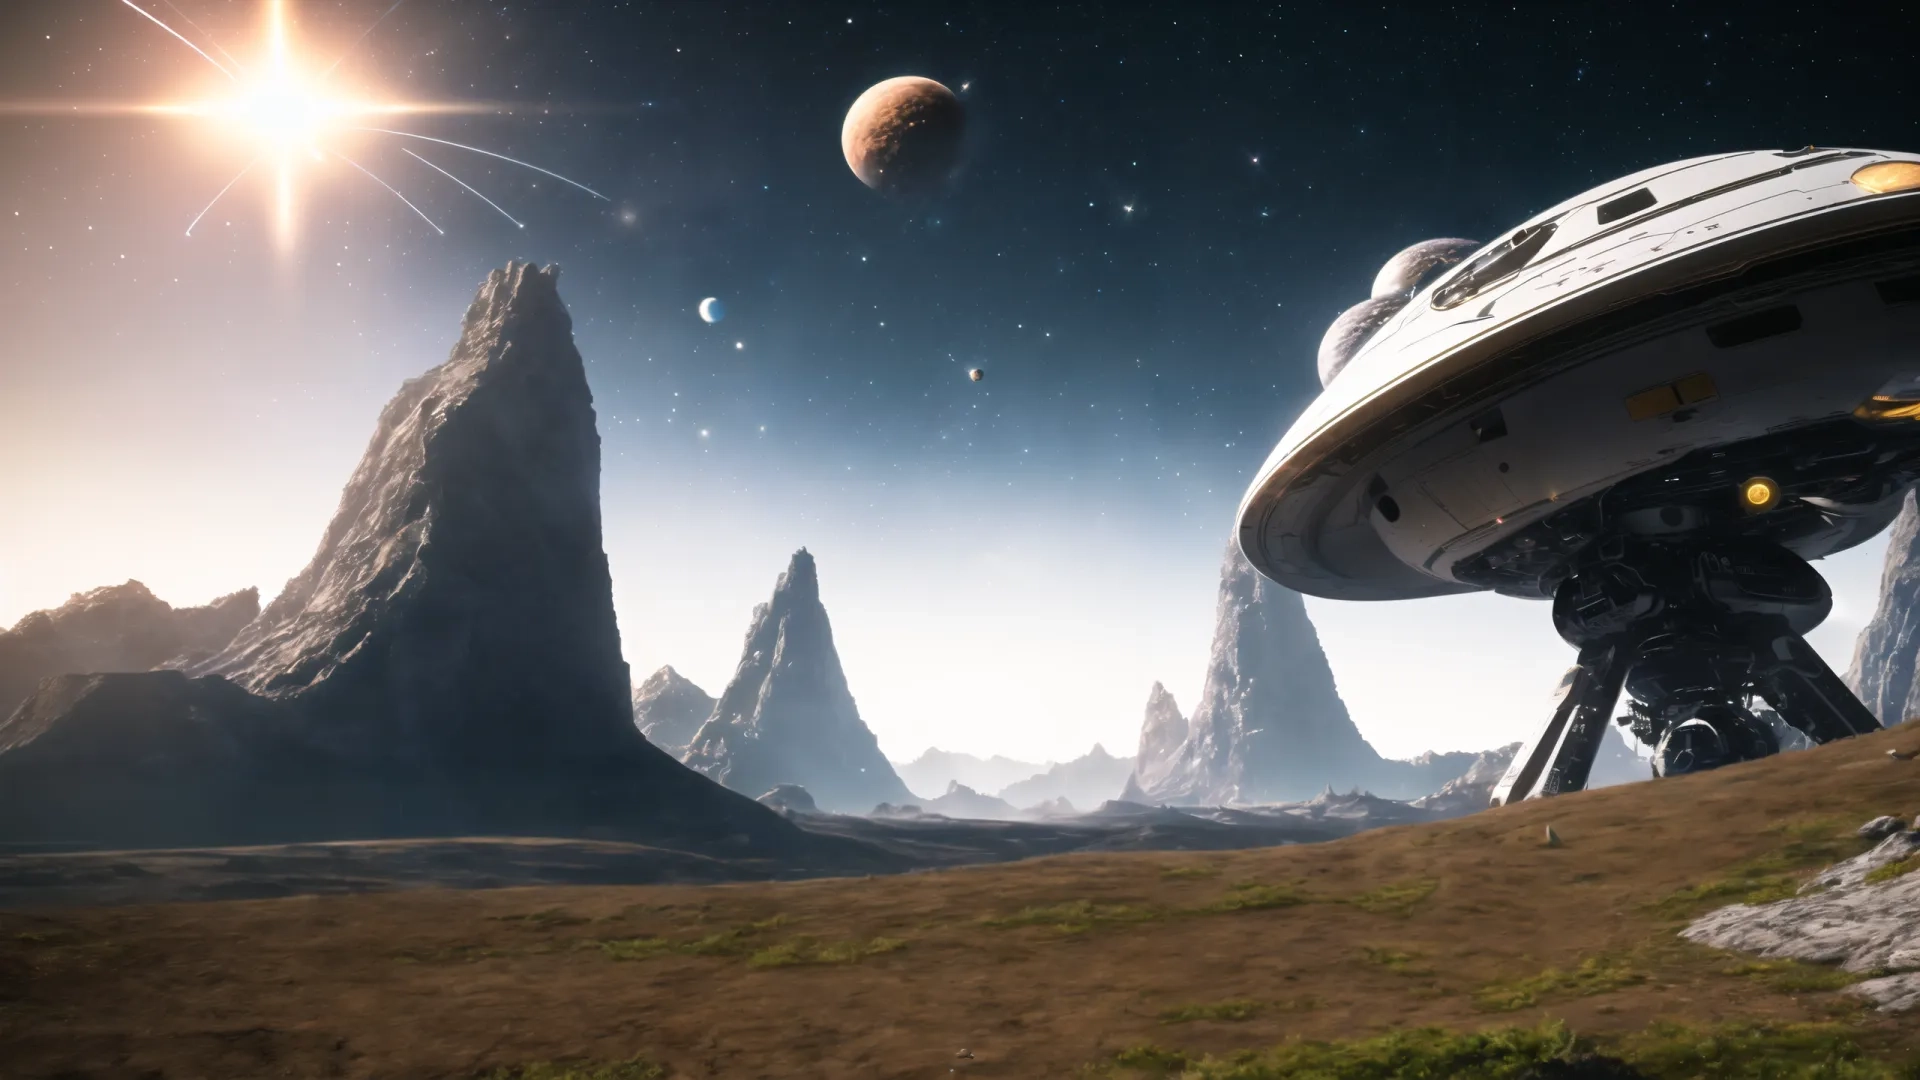 an artistic depiction of a spaceship approaching a mountain side on an alien surface, with planets in the distance and planets behind it, on this computer background
